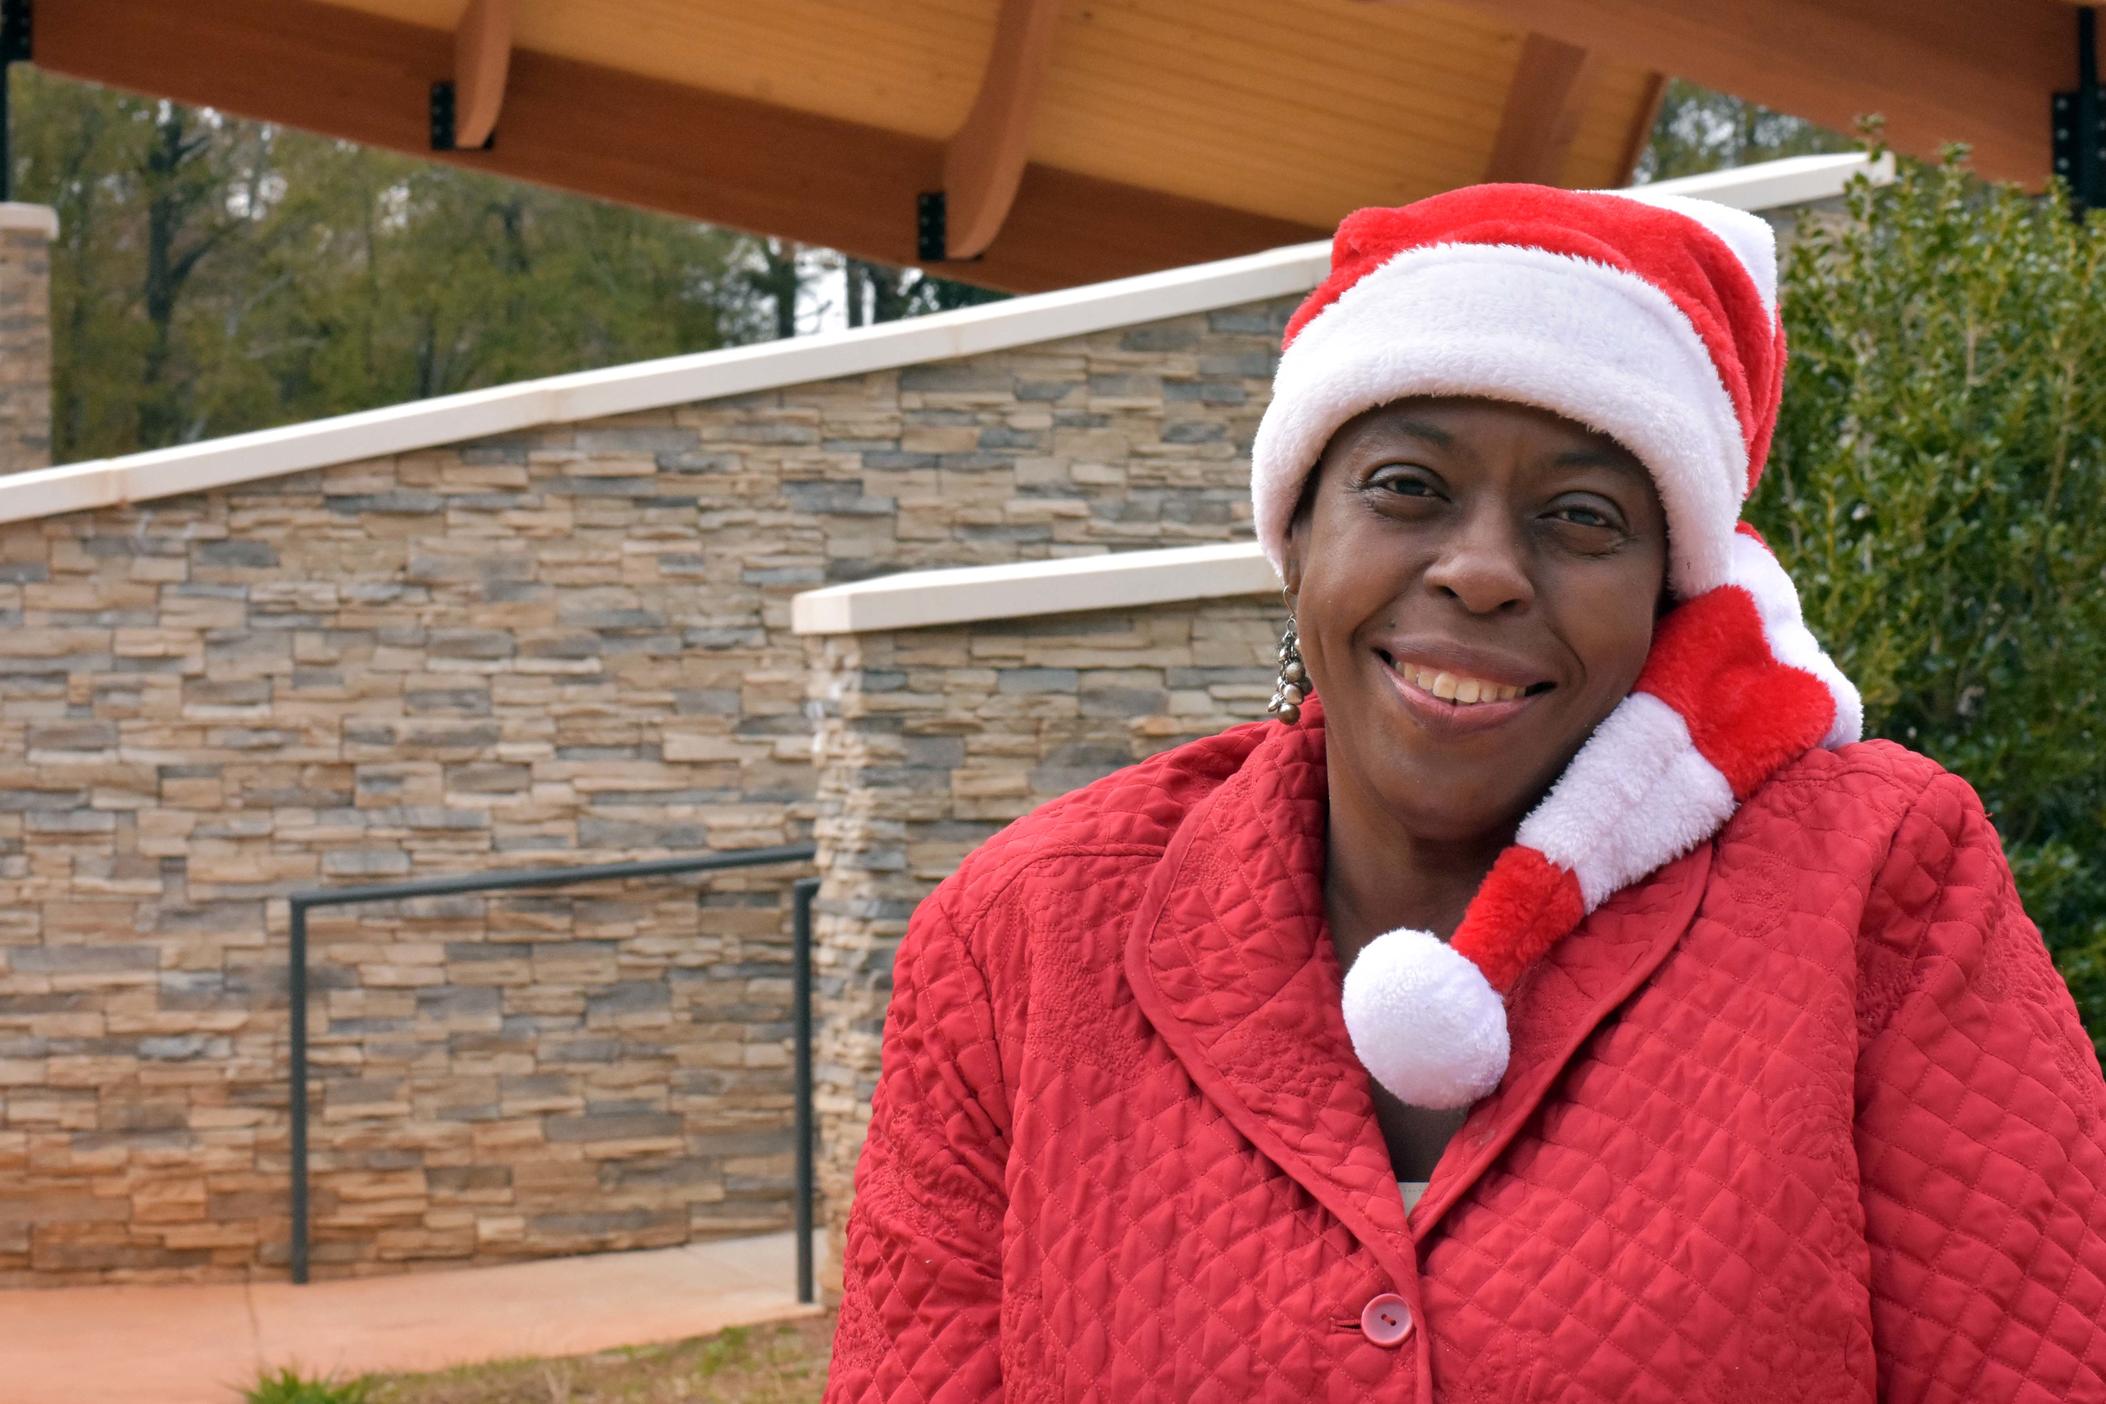 McDonough Mayor-elect Sandra Vincent takes a break from painting a facade for a Christmas village to talk about the city's past, present and future.